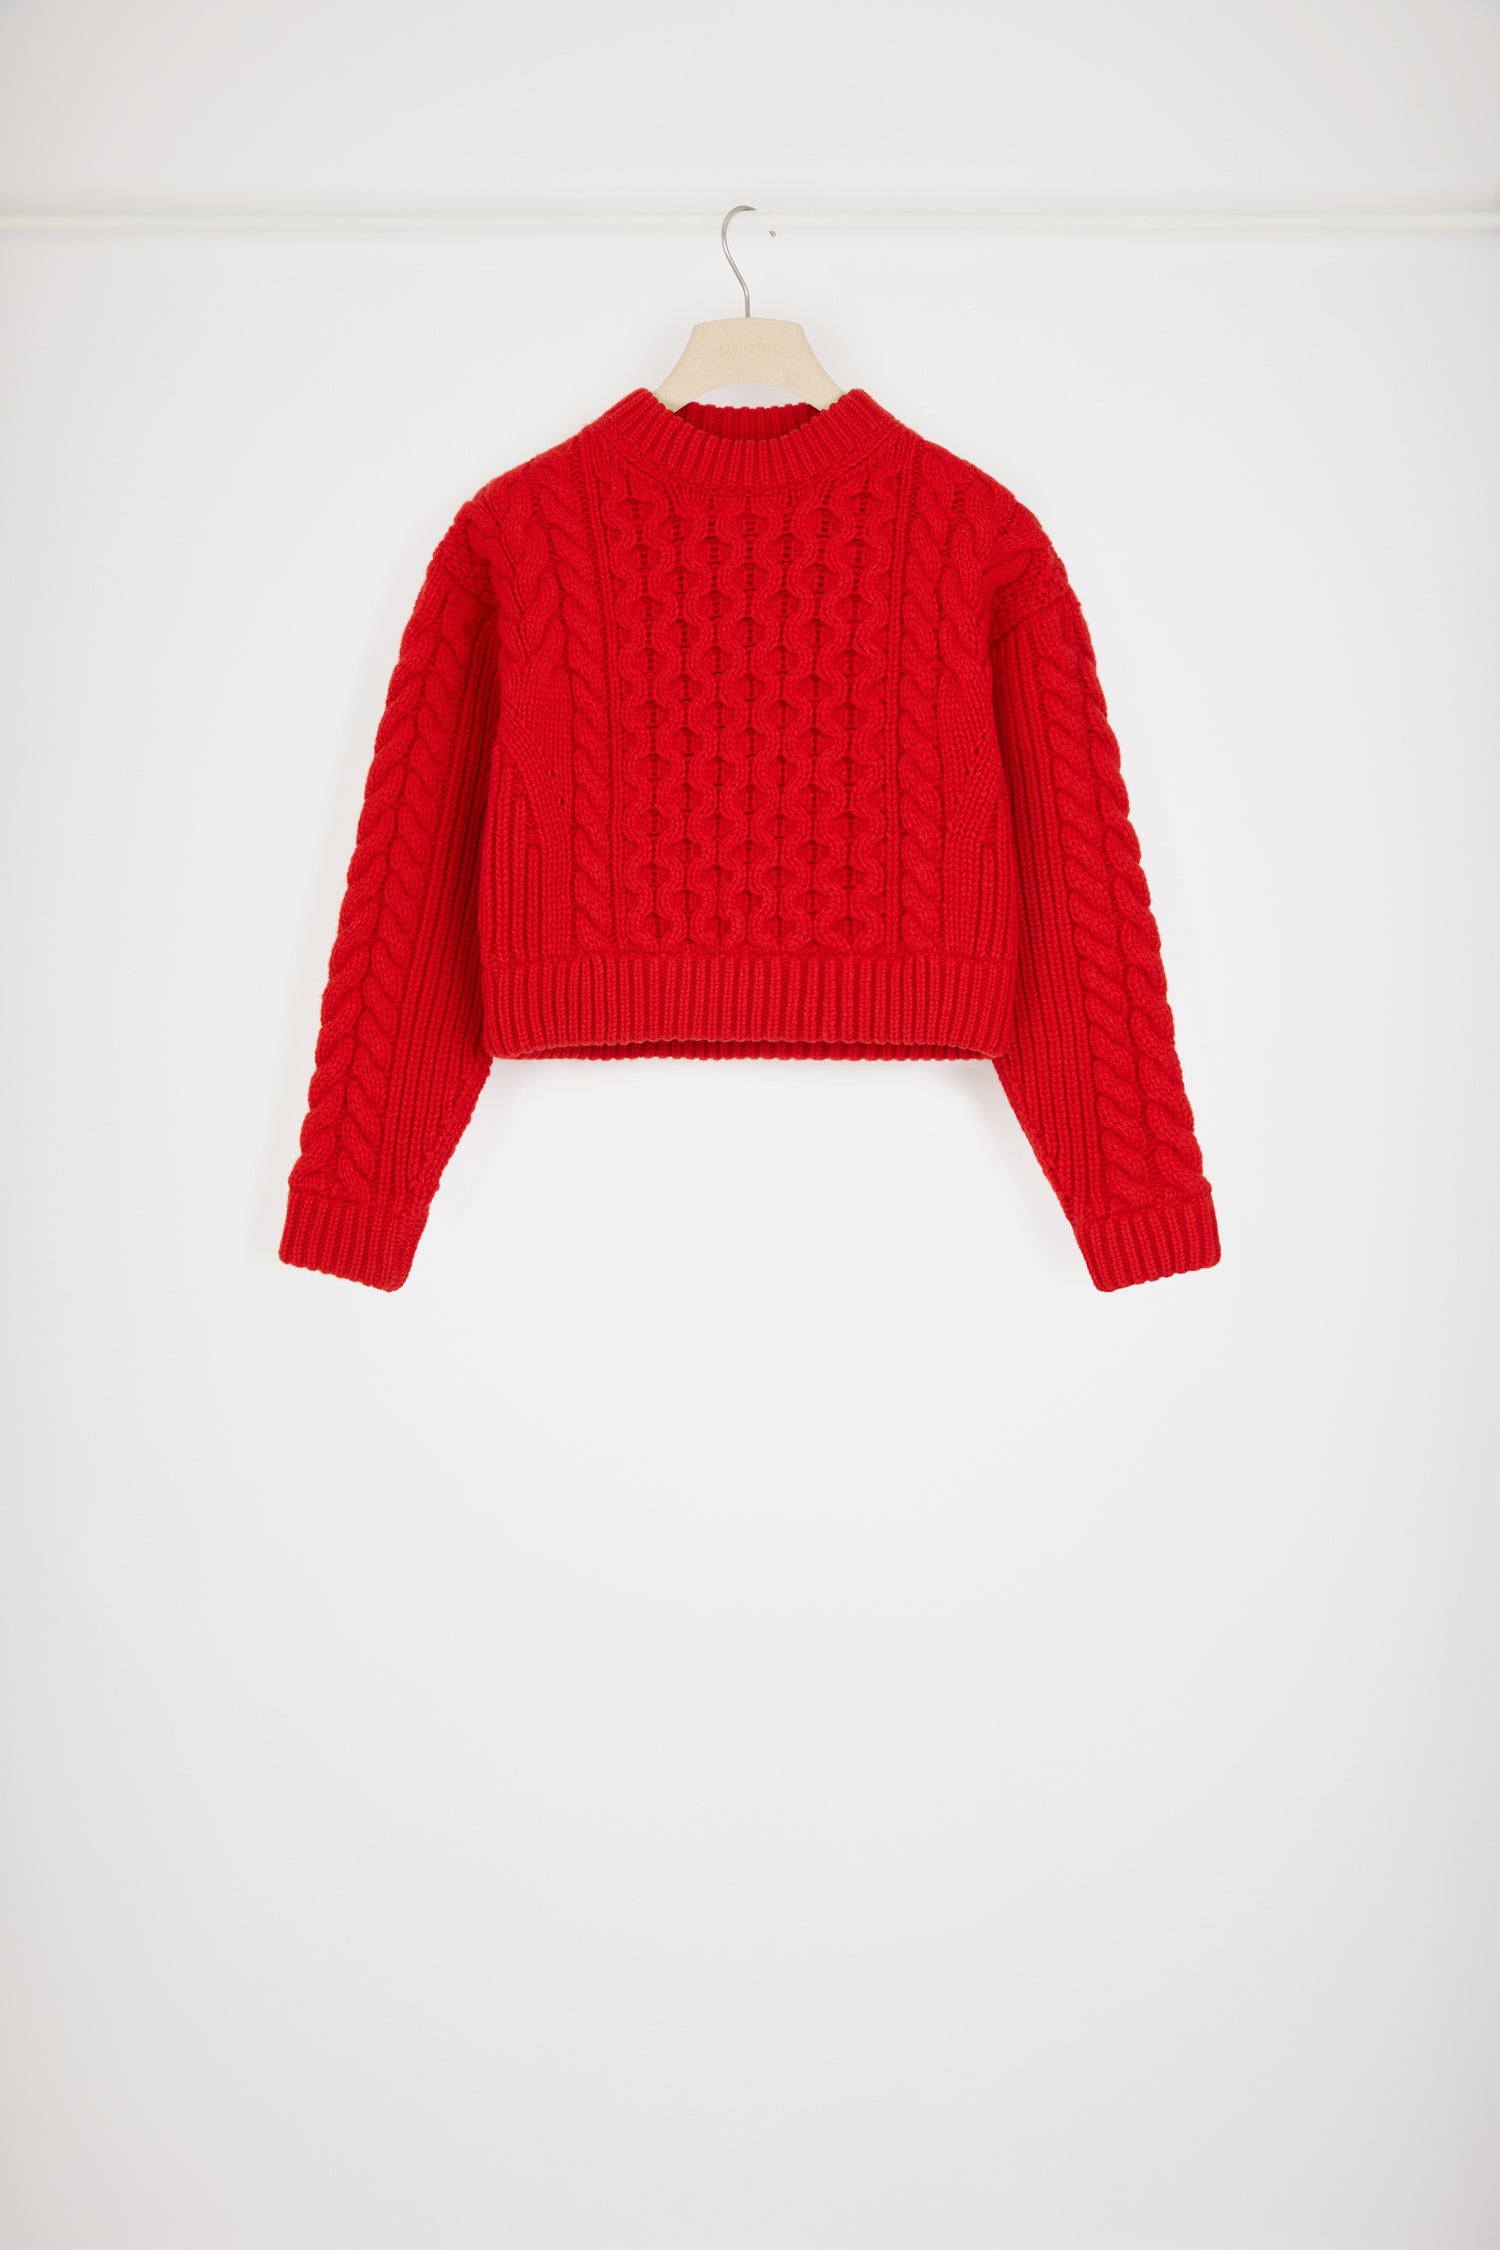 Patou | Mixed cable knit jumper in wool and cashmere